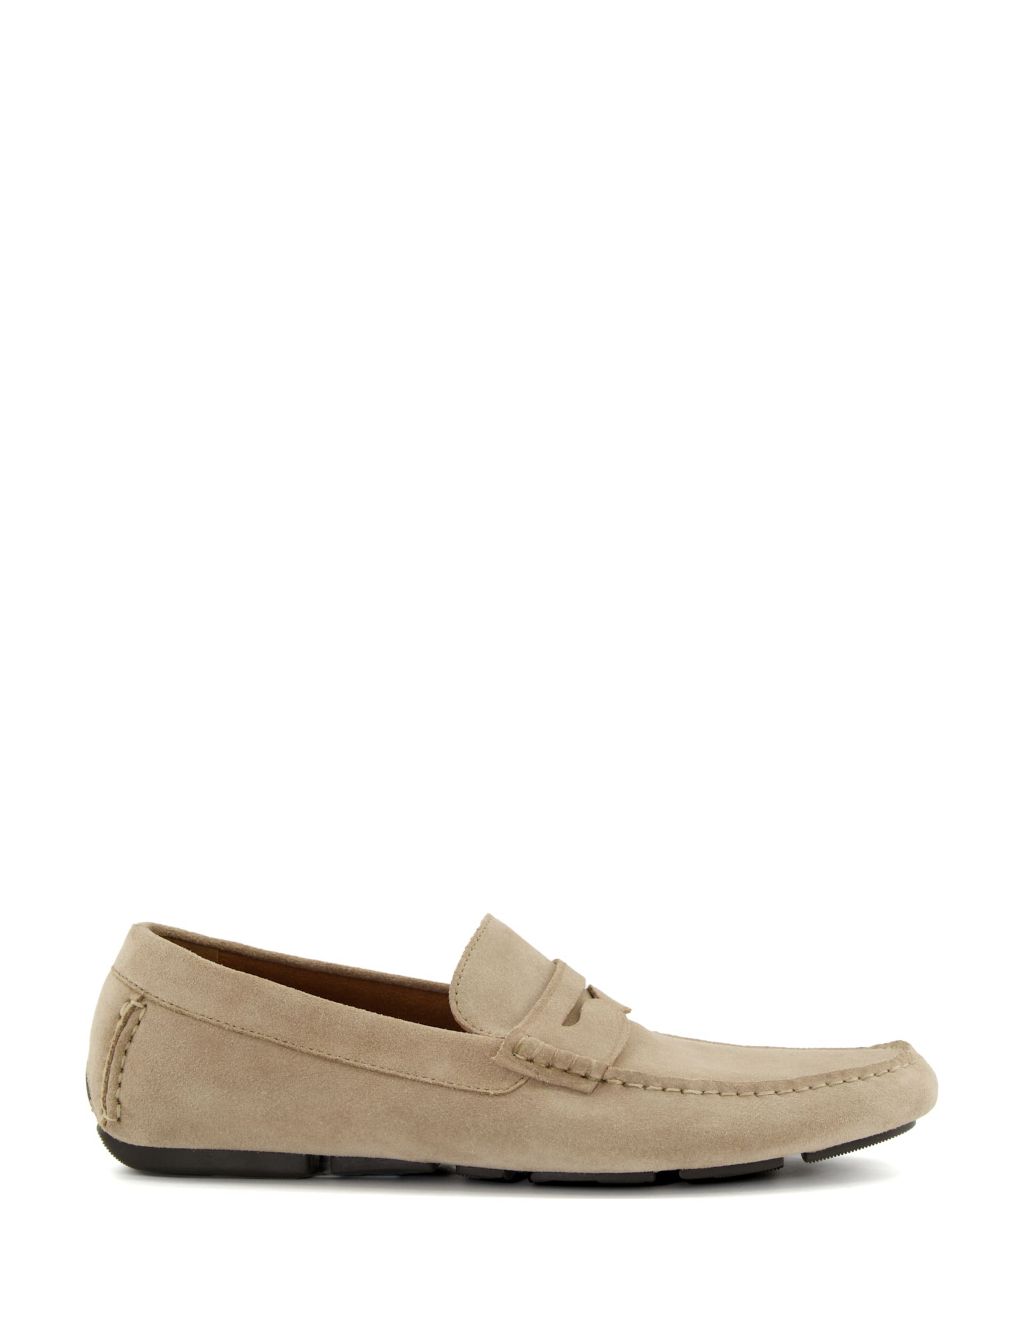 Suede Slip-On Loafers image 1